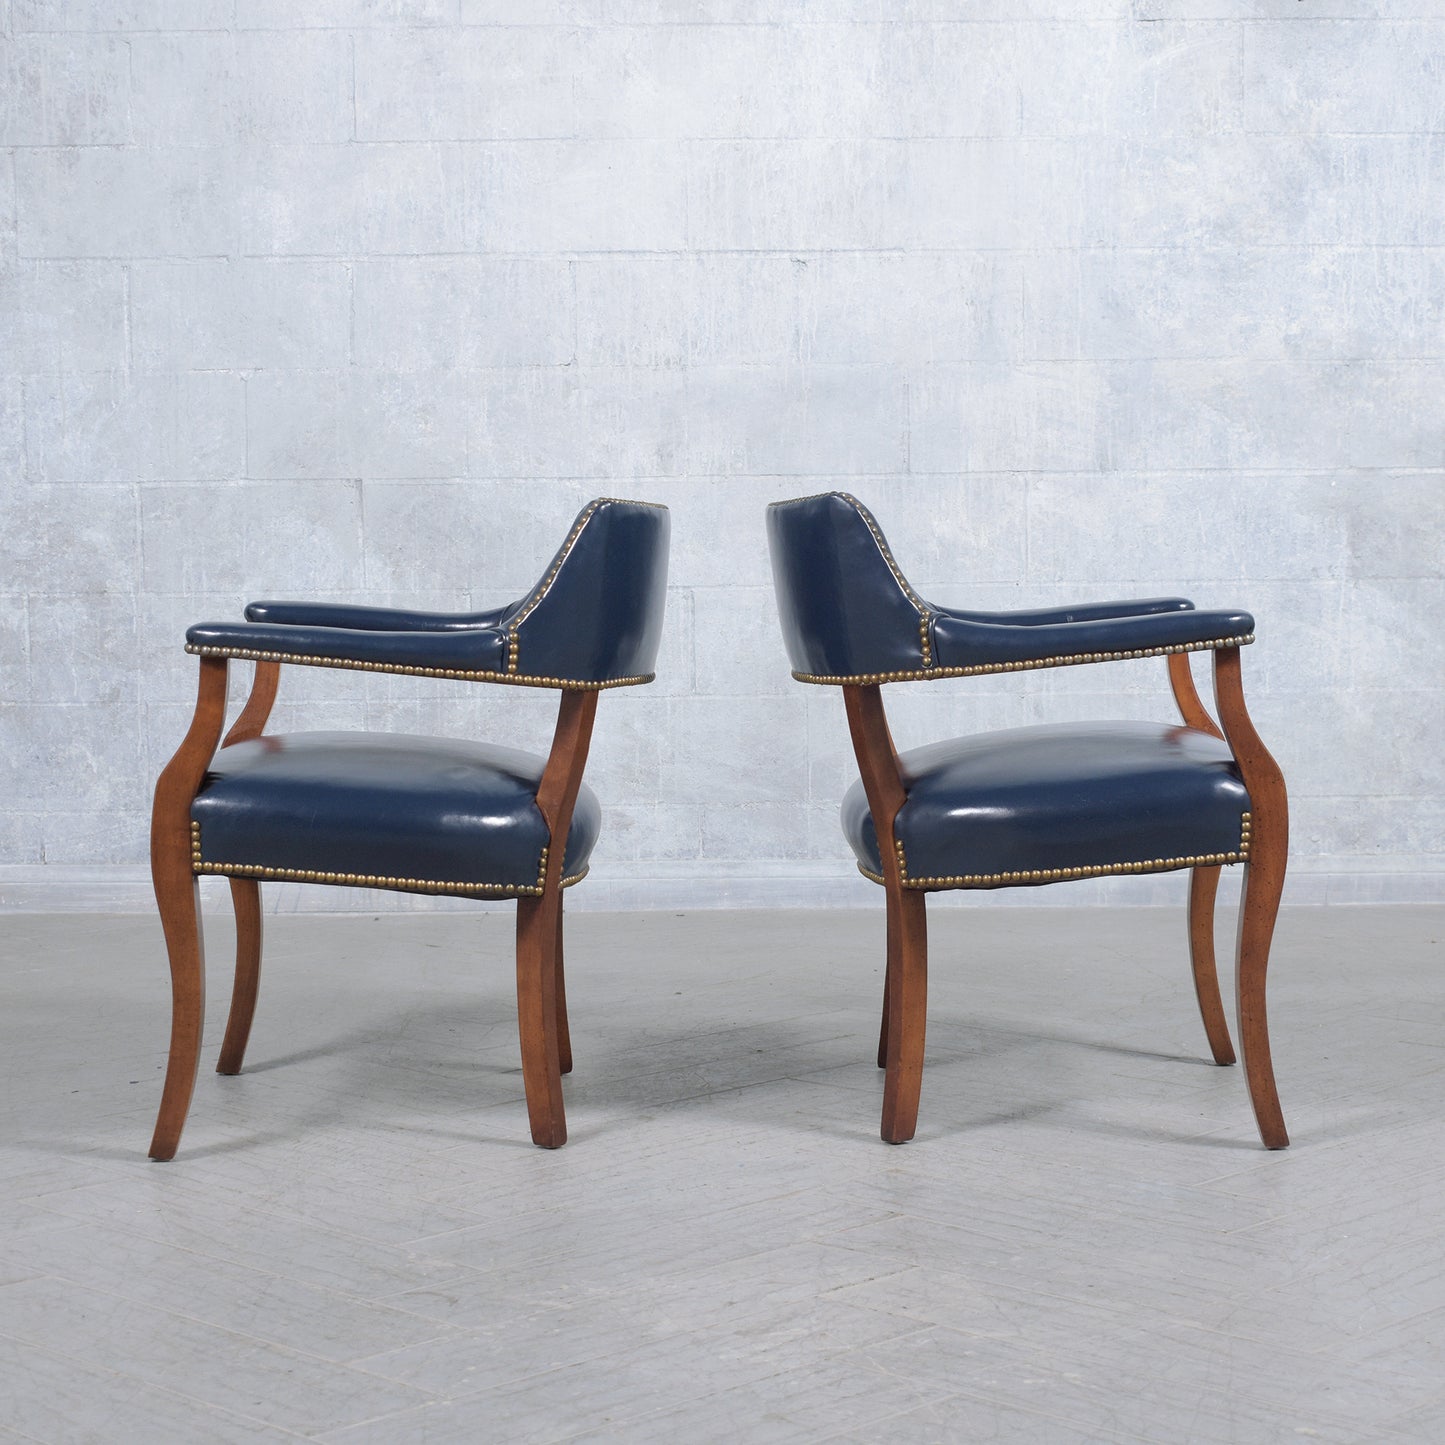 Restored Mahogany Barrel Armchairs with Navy Blue Leather - Vintage Elegance